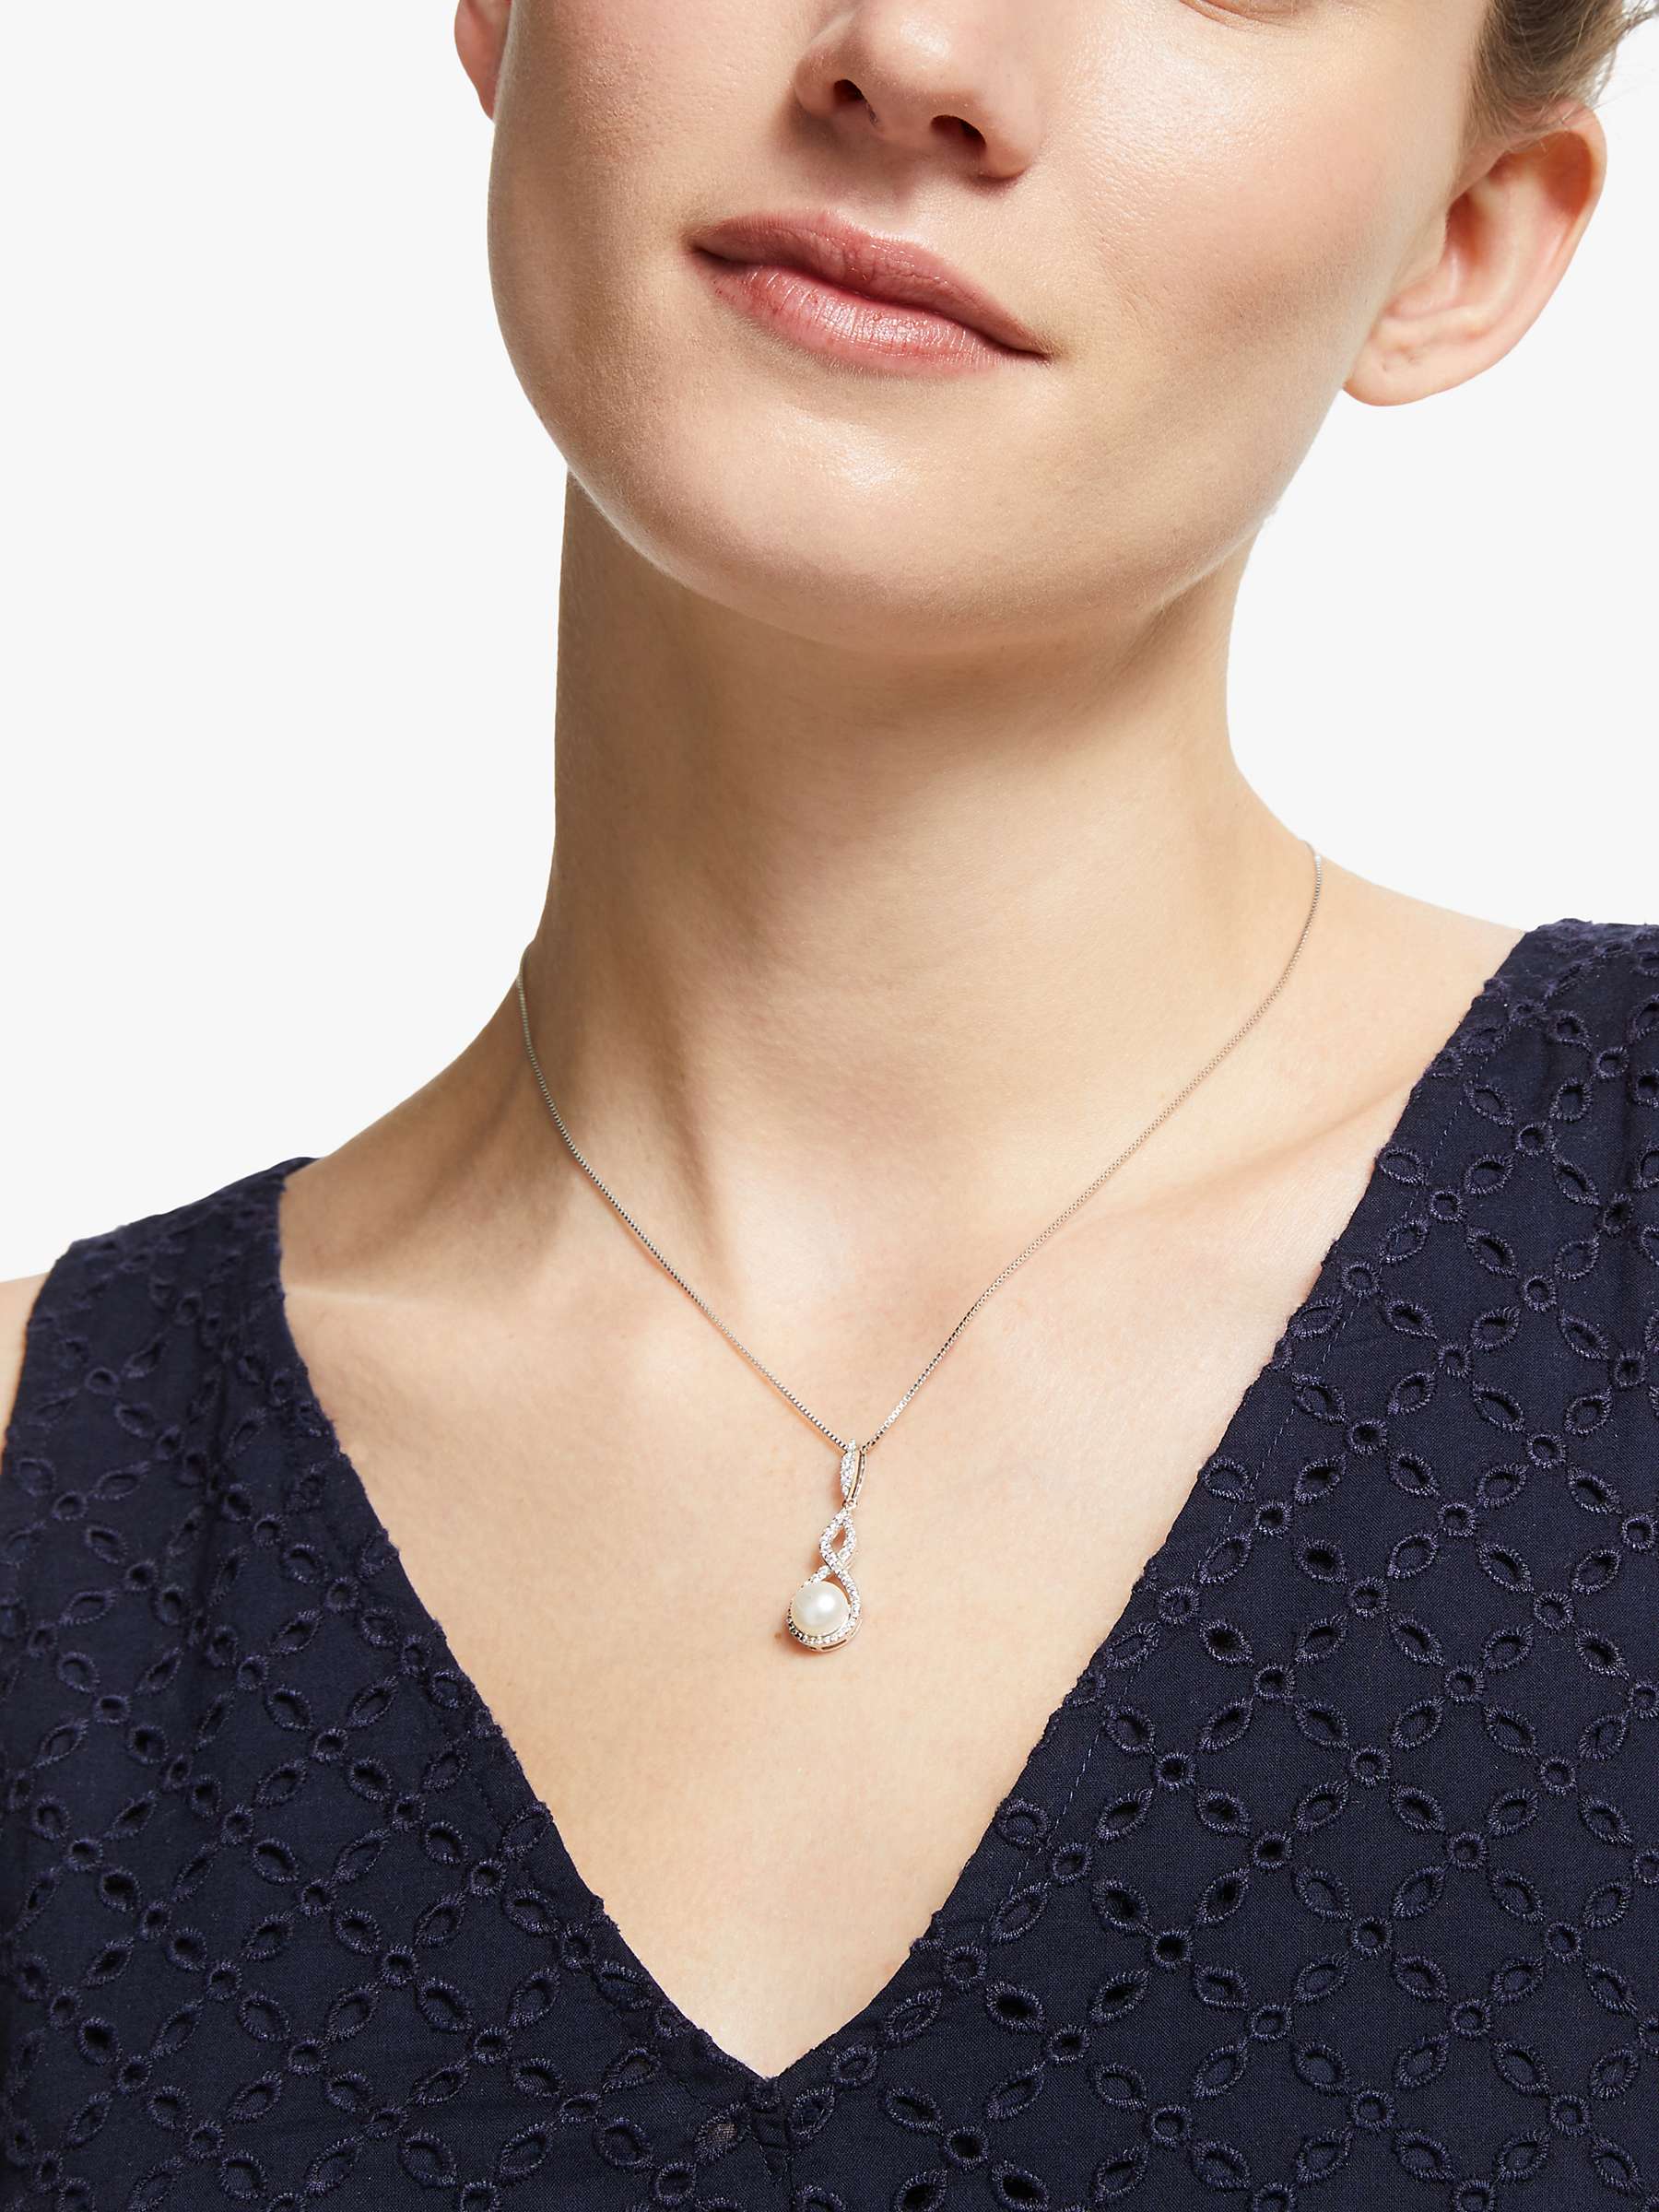 Buy Lido Pearls Cubic Zirconia and Freshwater Pearl Infinity Pendant Necklace, Silver/White Online at johnlewis.com